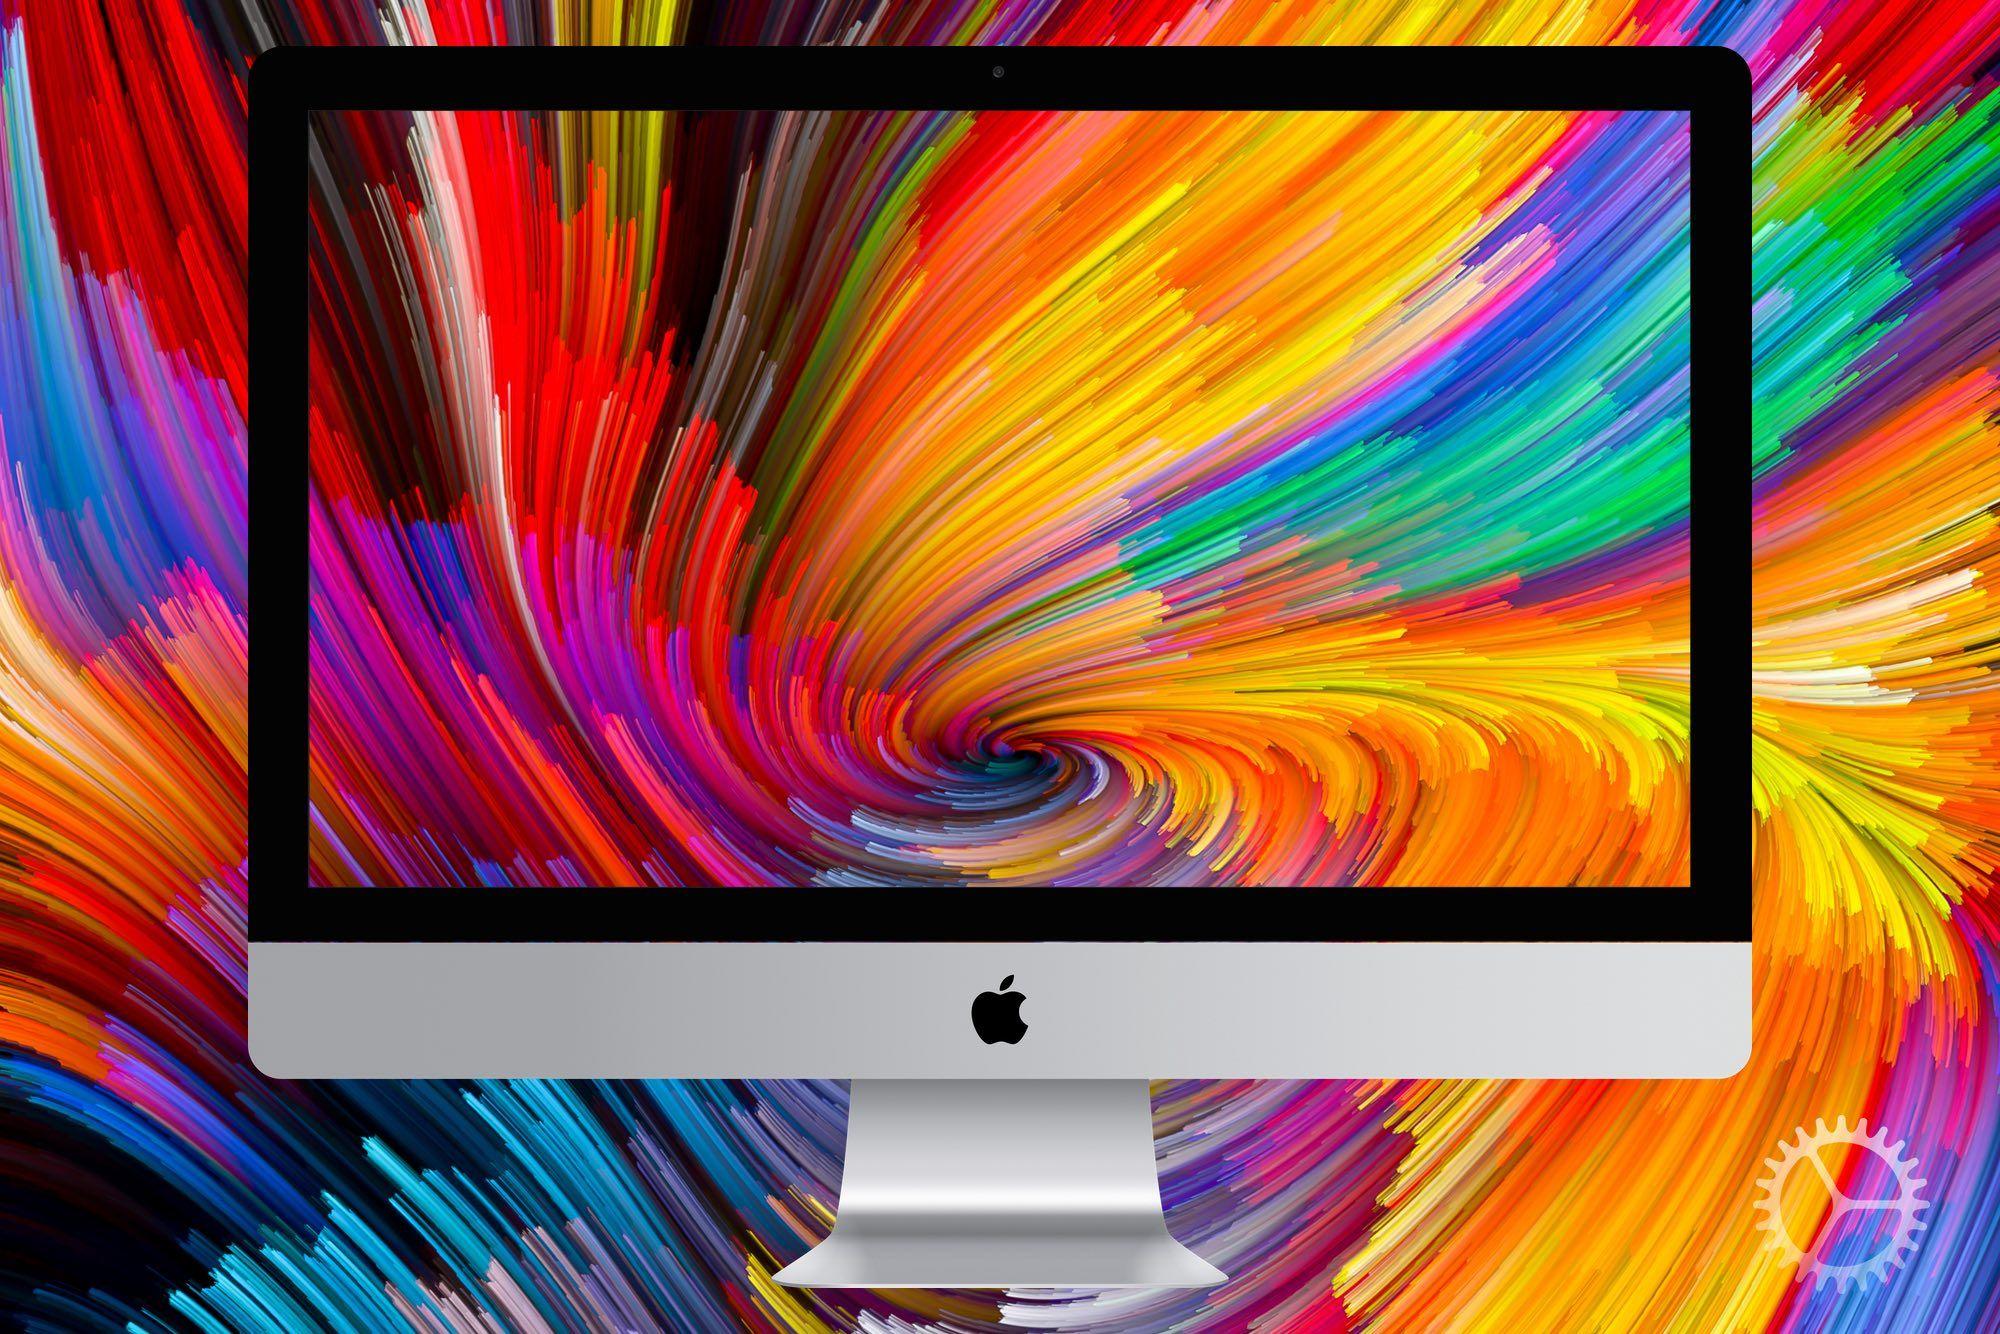 The new 2017 iMac wallpaper are gorgeous download them here